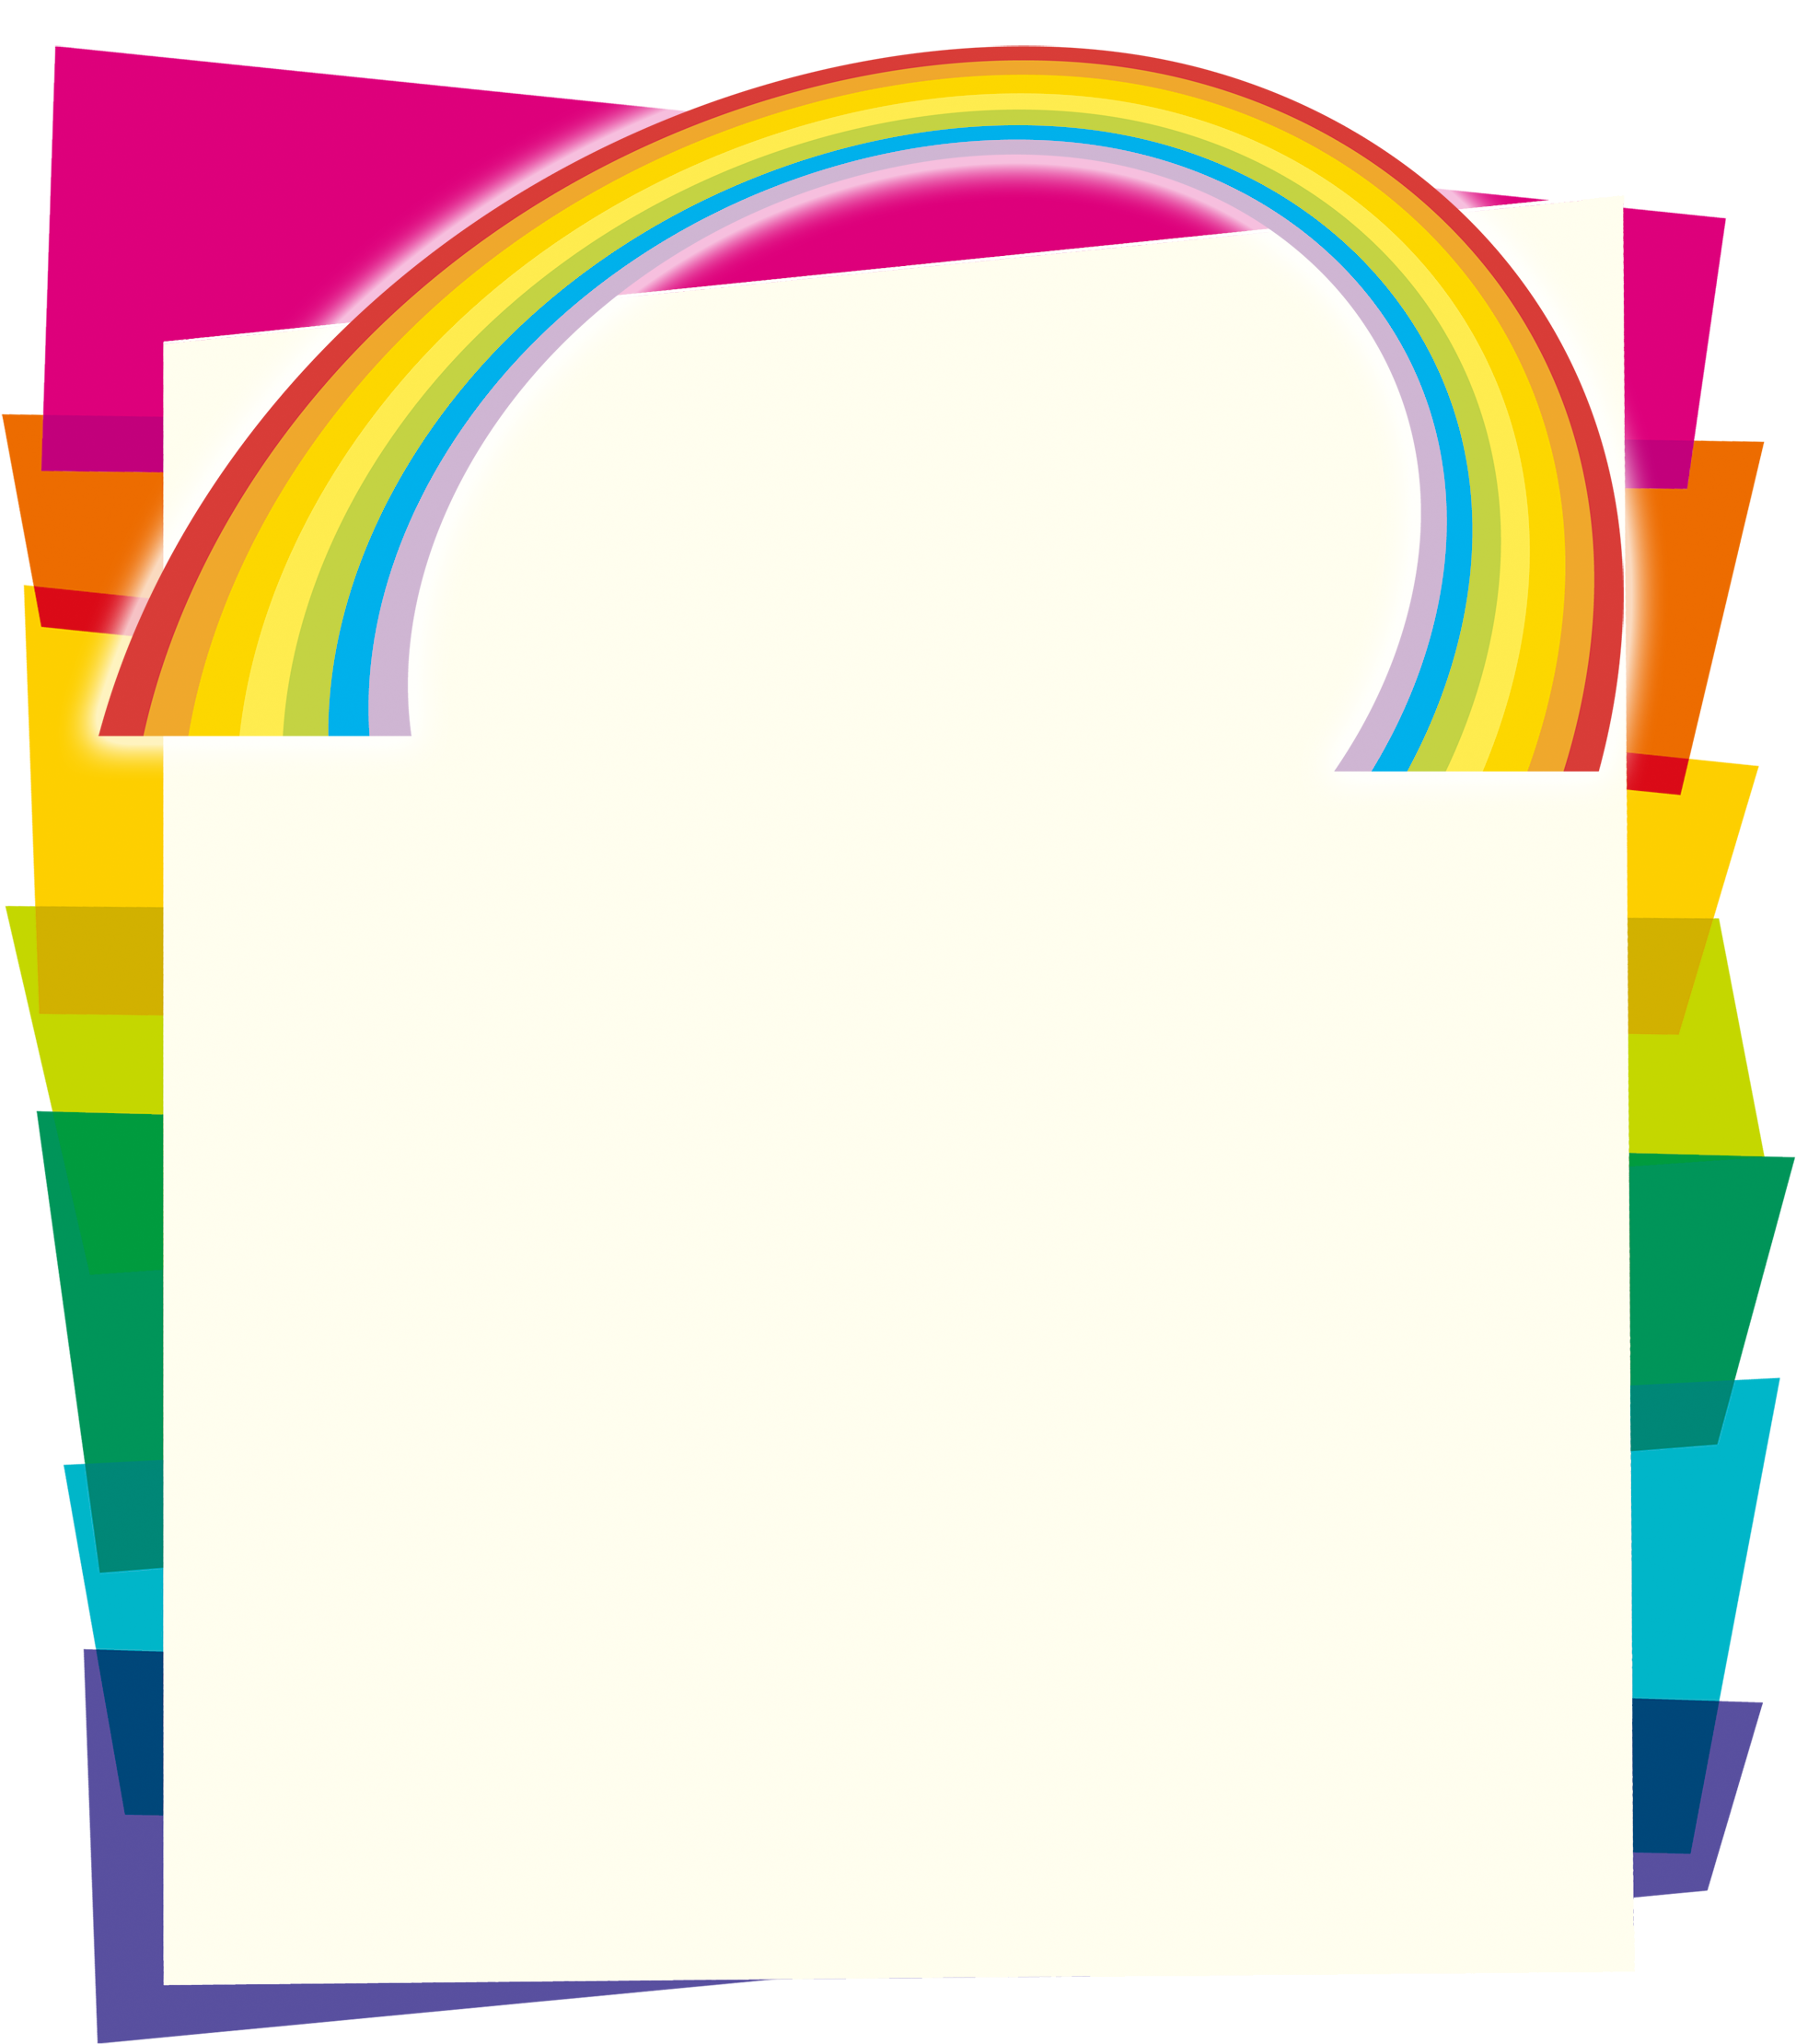 Colorful Rainbow Border Design PNG